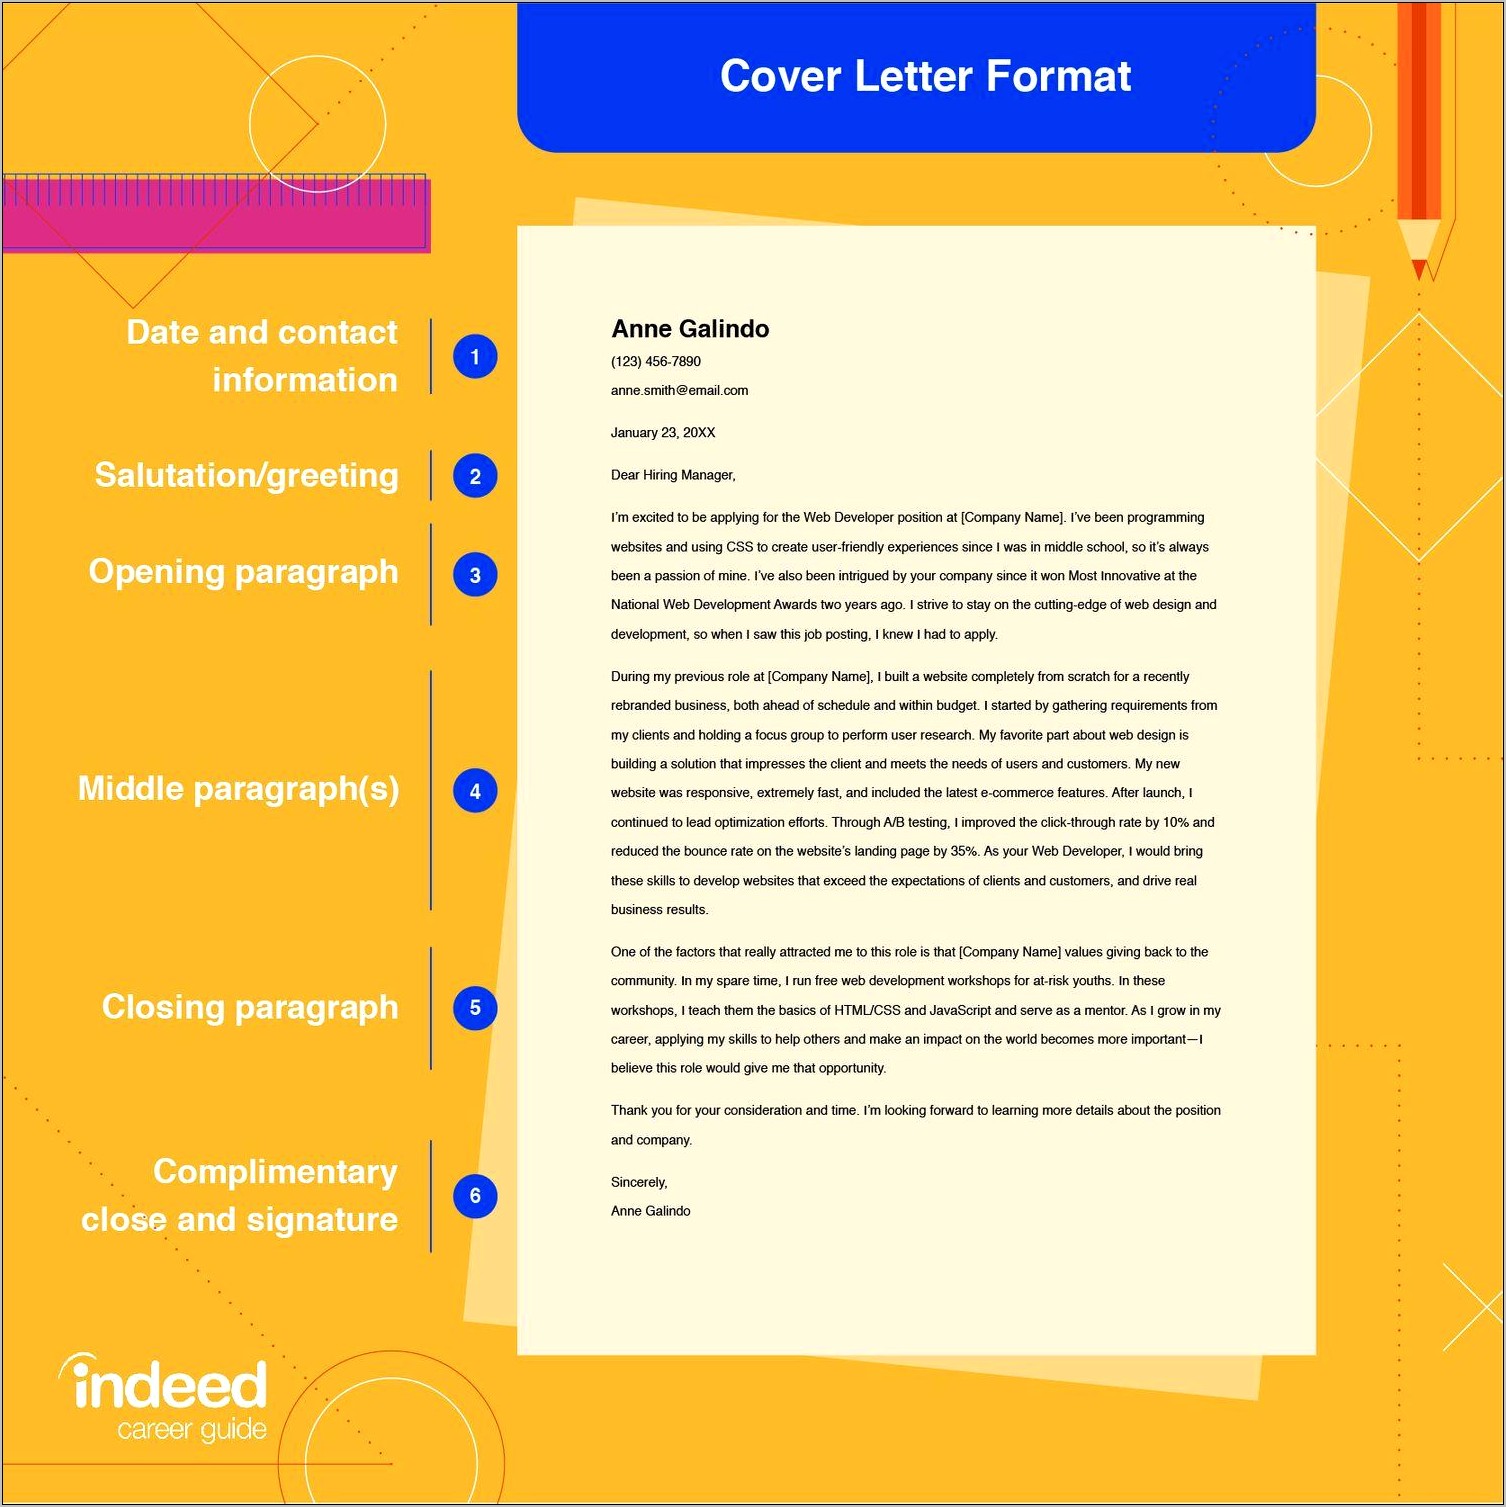 Example Email Cover Letter For Resume